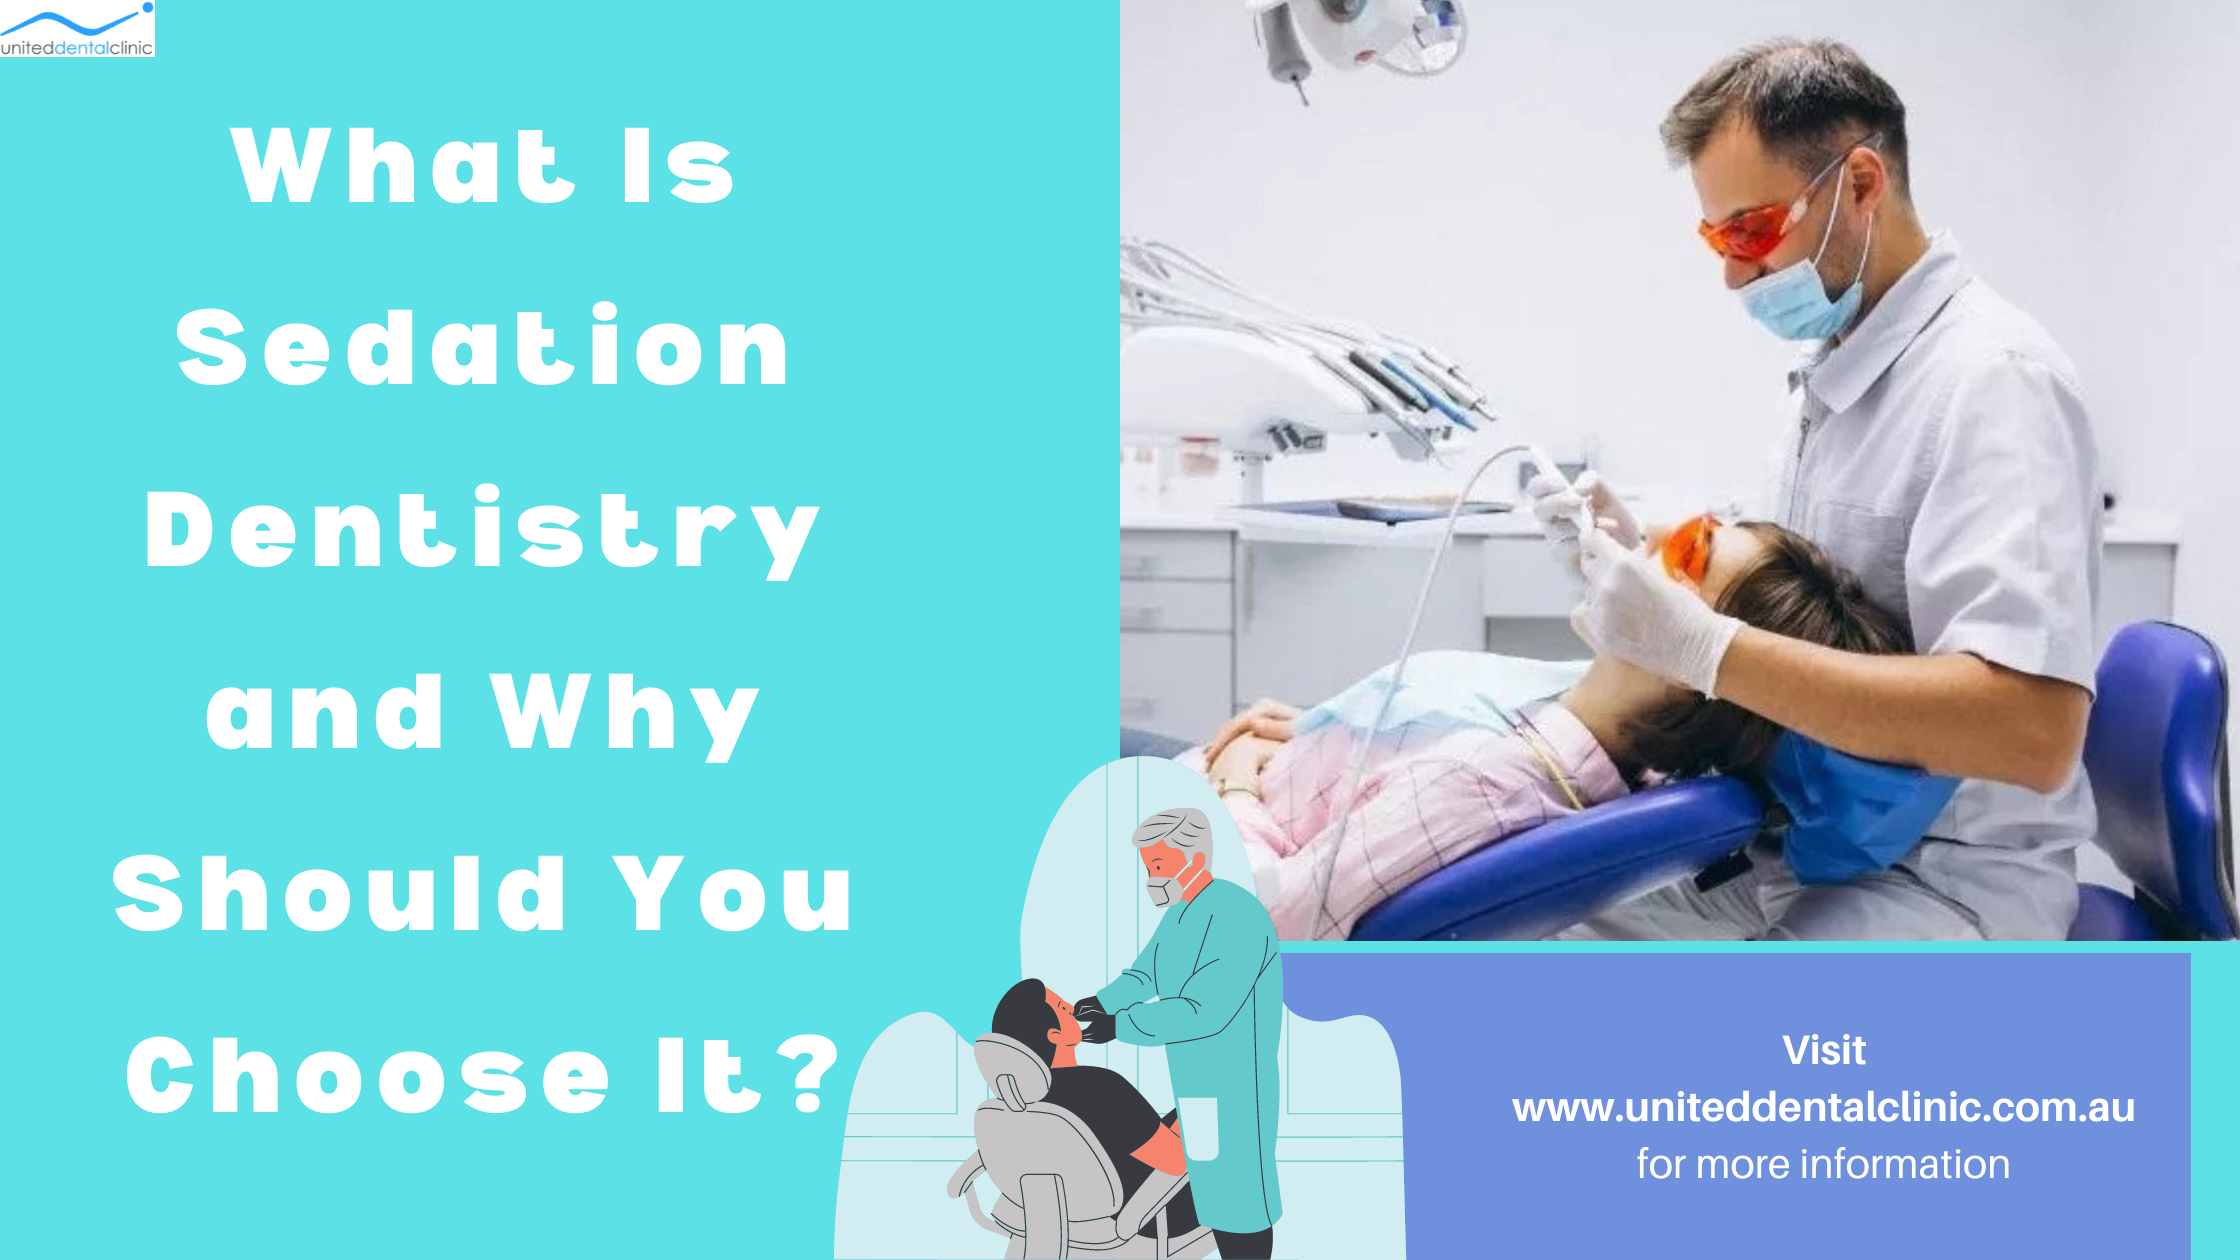 What Is Sedation Dentistry and Why Should You Choose It?